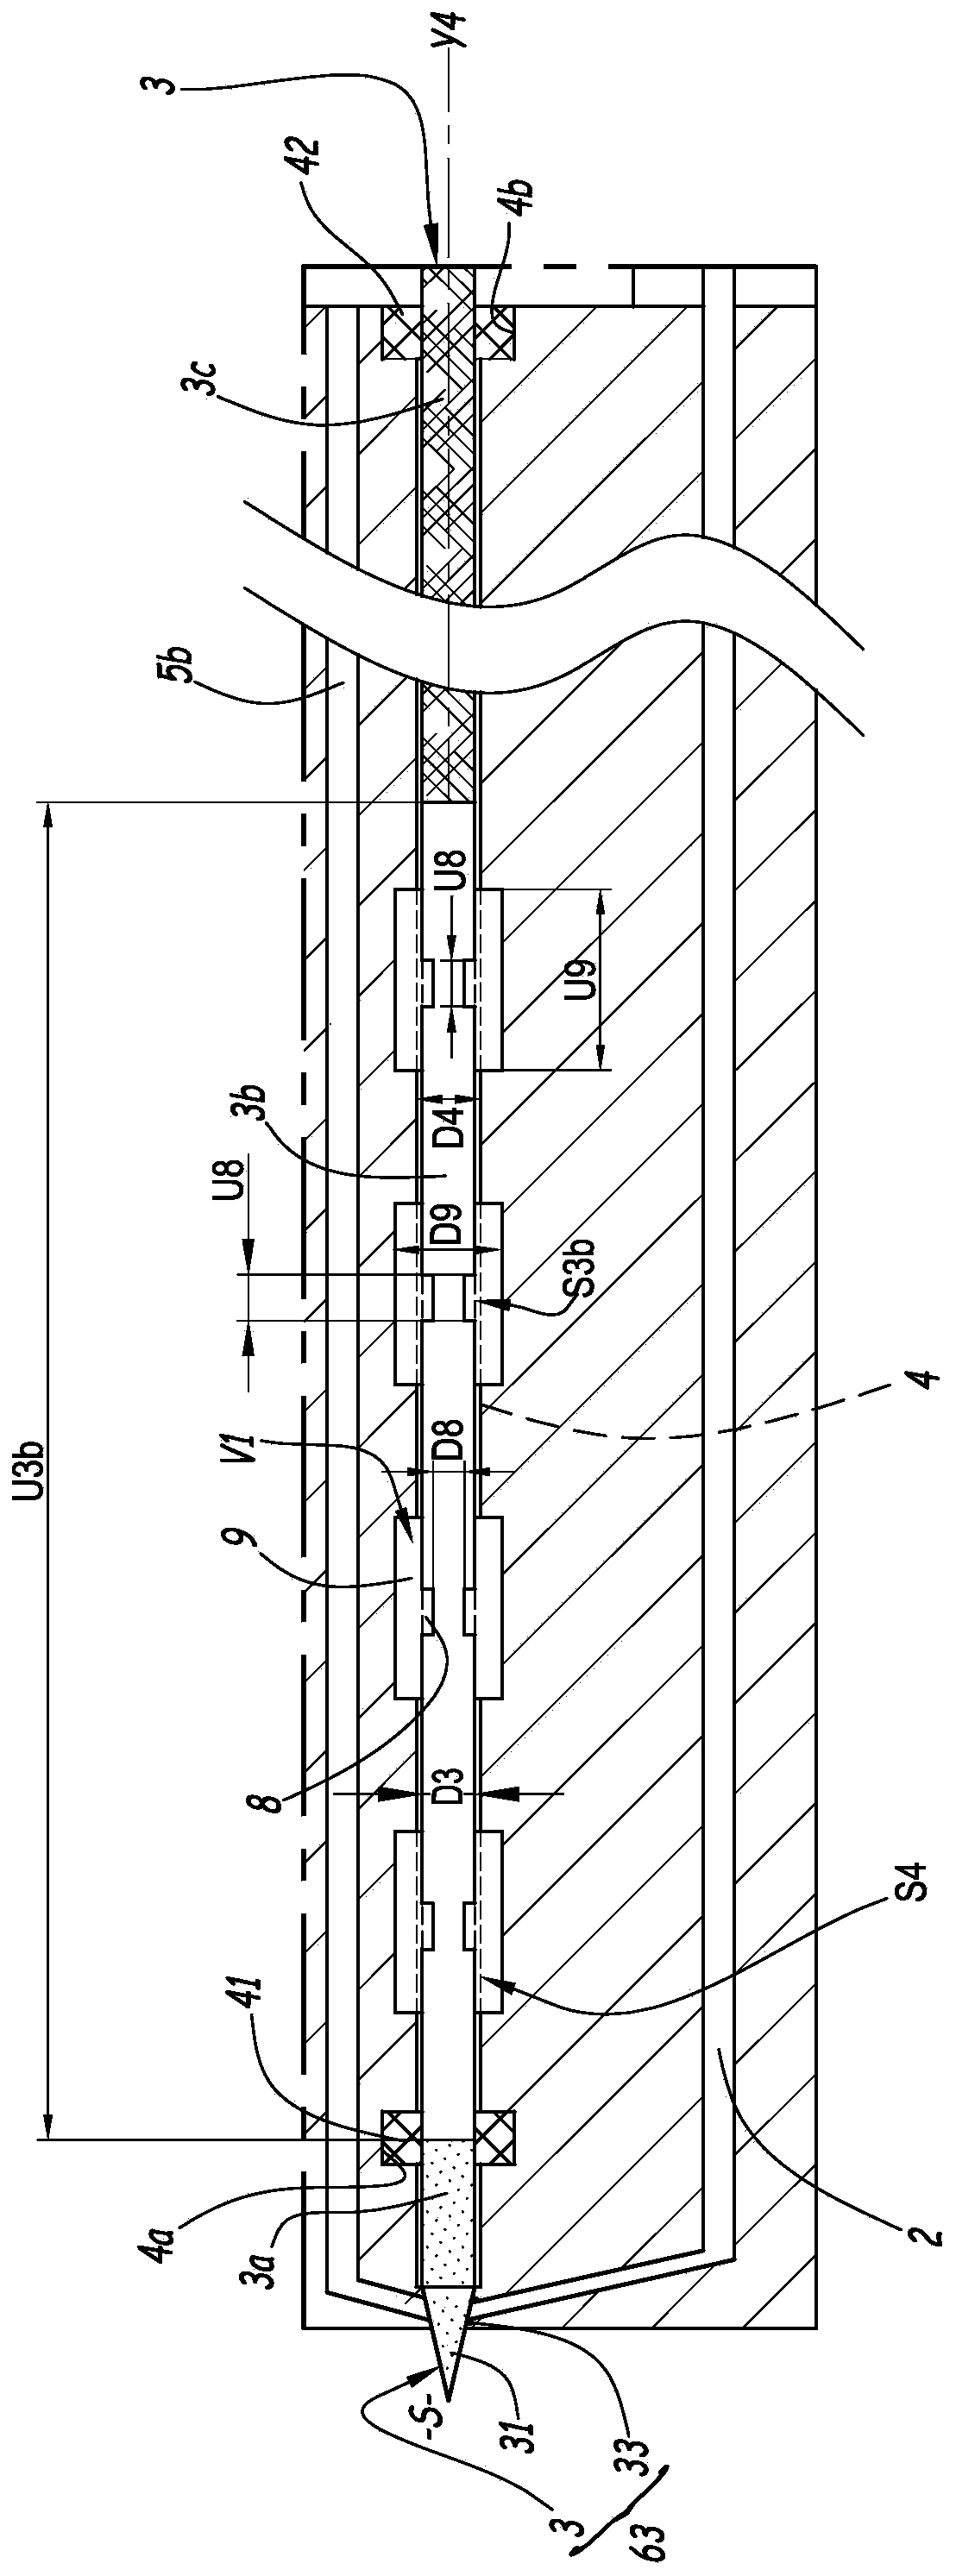 Spray nozzle for electrostatic spraying of paint products and apparatus for spraying paint products comprising such spray nozzle